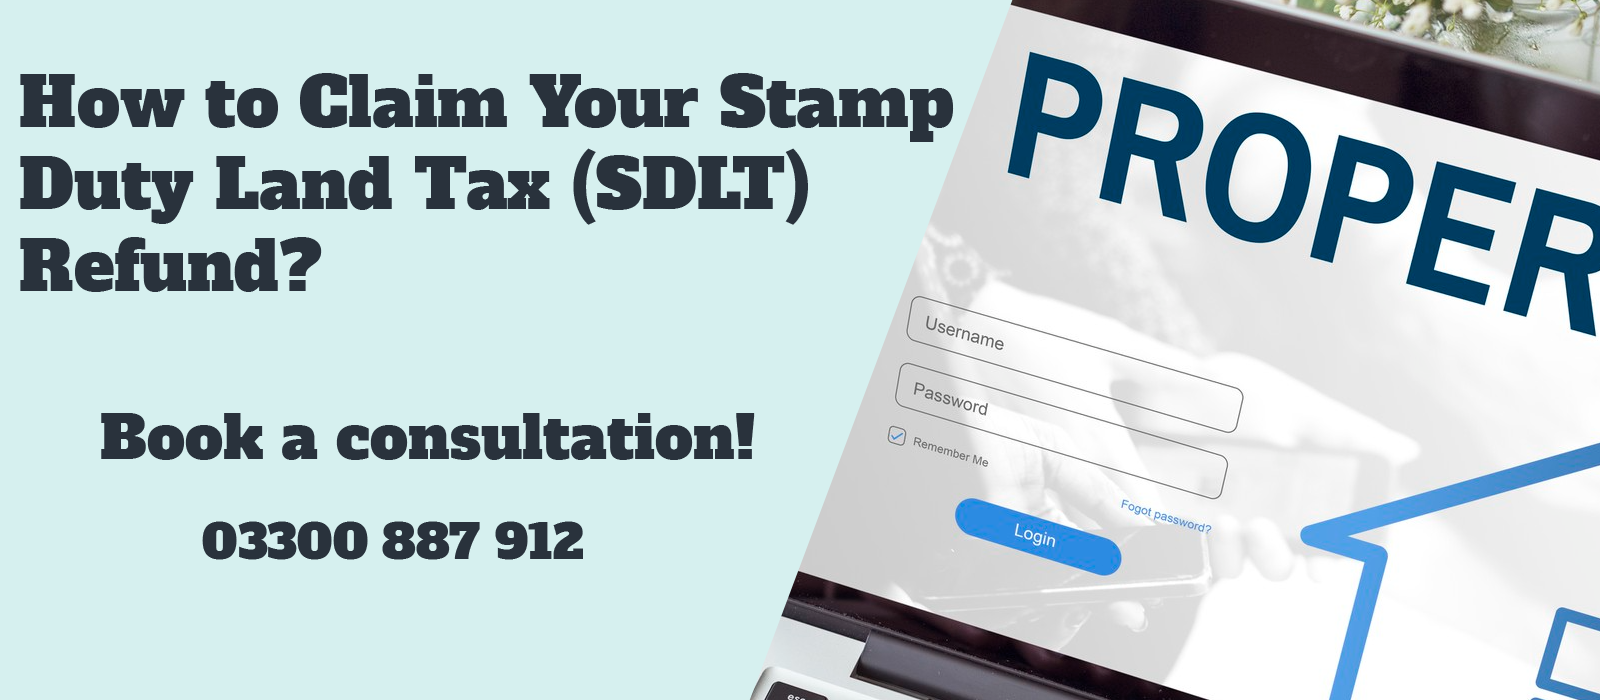 How to Claim Your Stamp Duty Land Tax (SDLT) Refund?